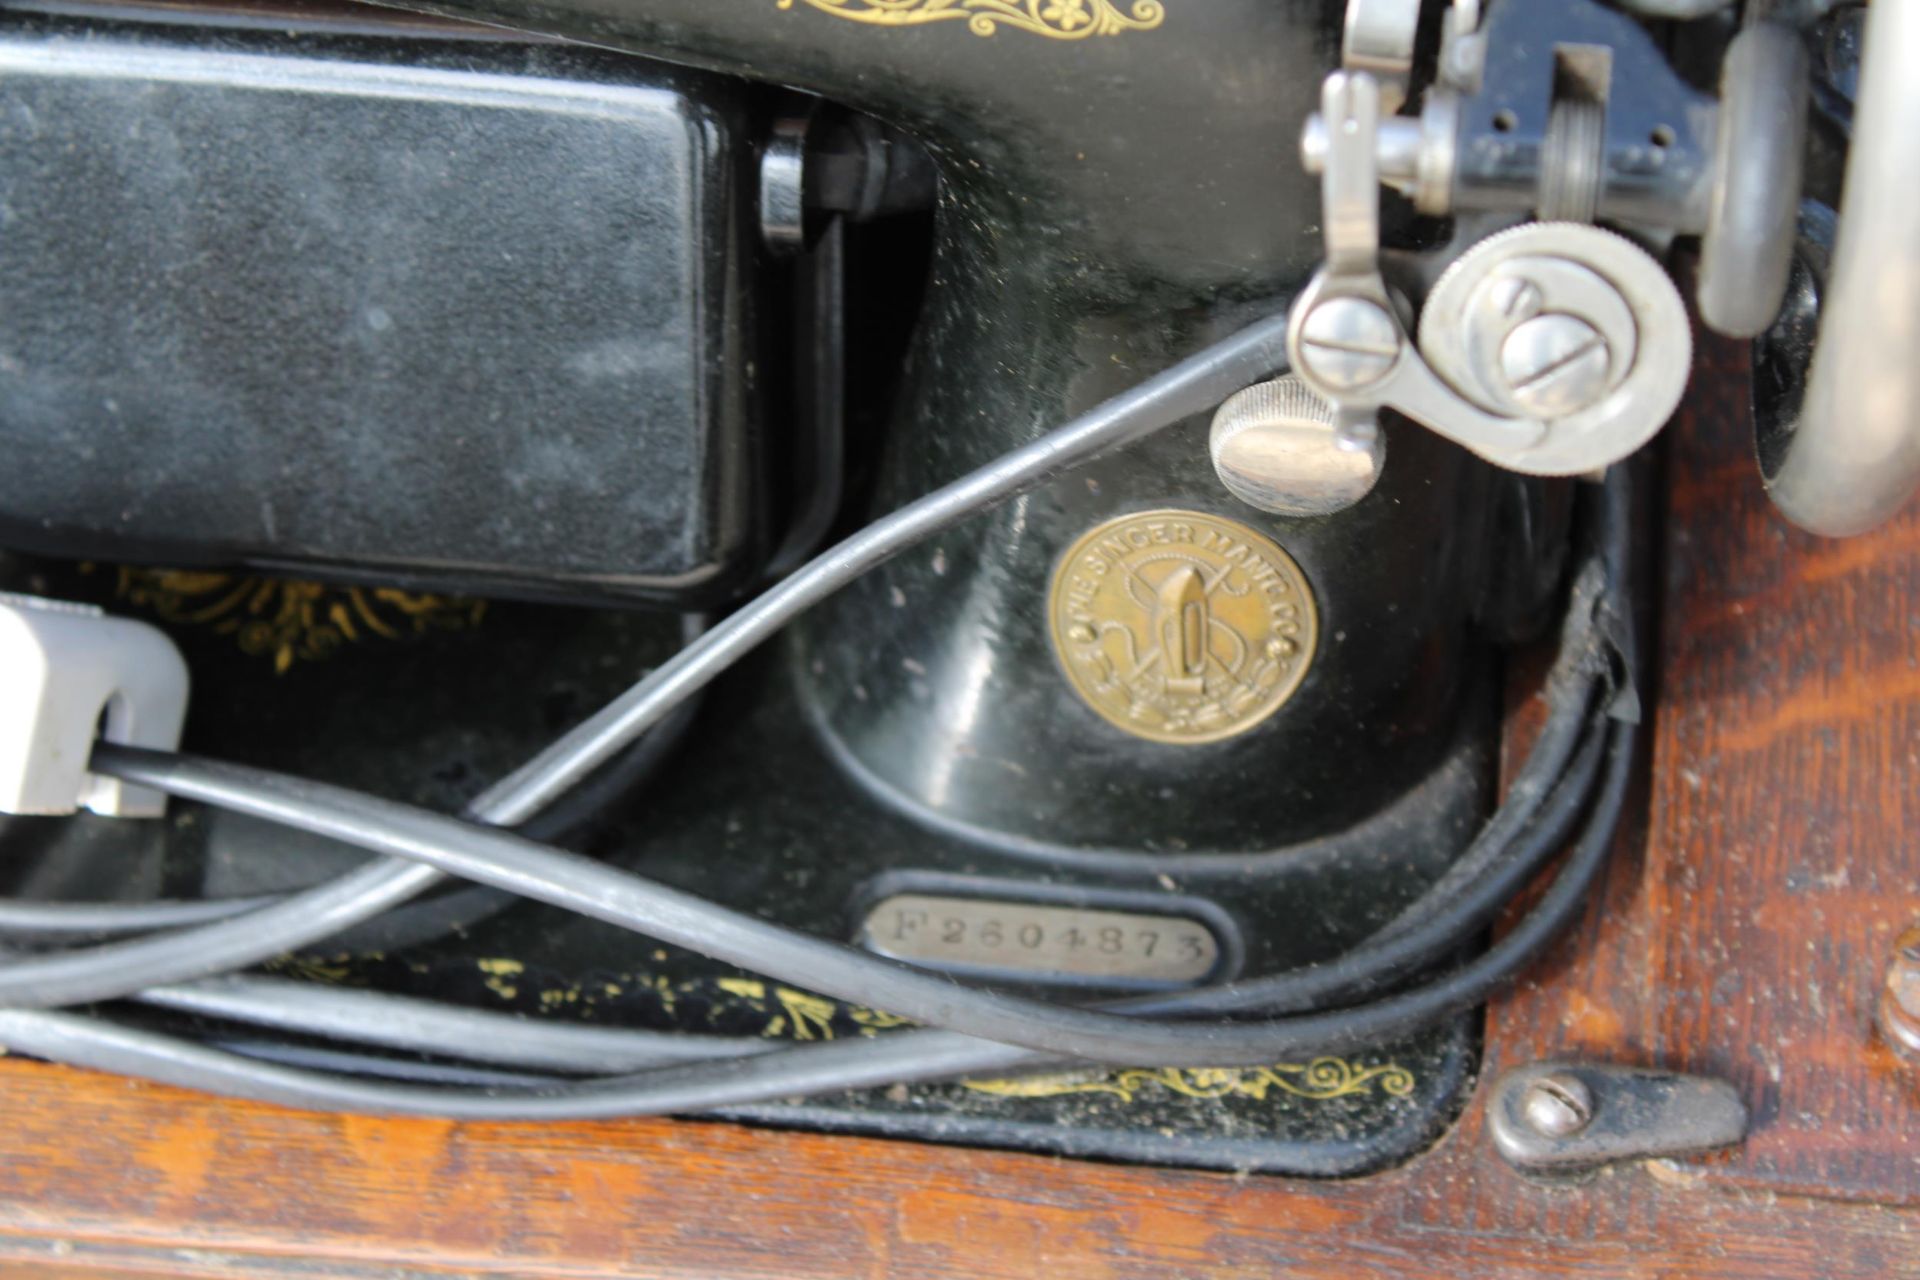 A VINTAGE SINGER SEWING MACHINE WITH WOODEN CARRY CASE - Image 3 of 3